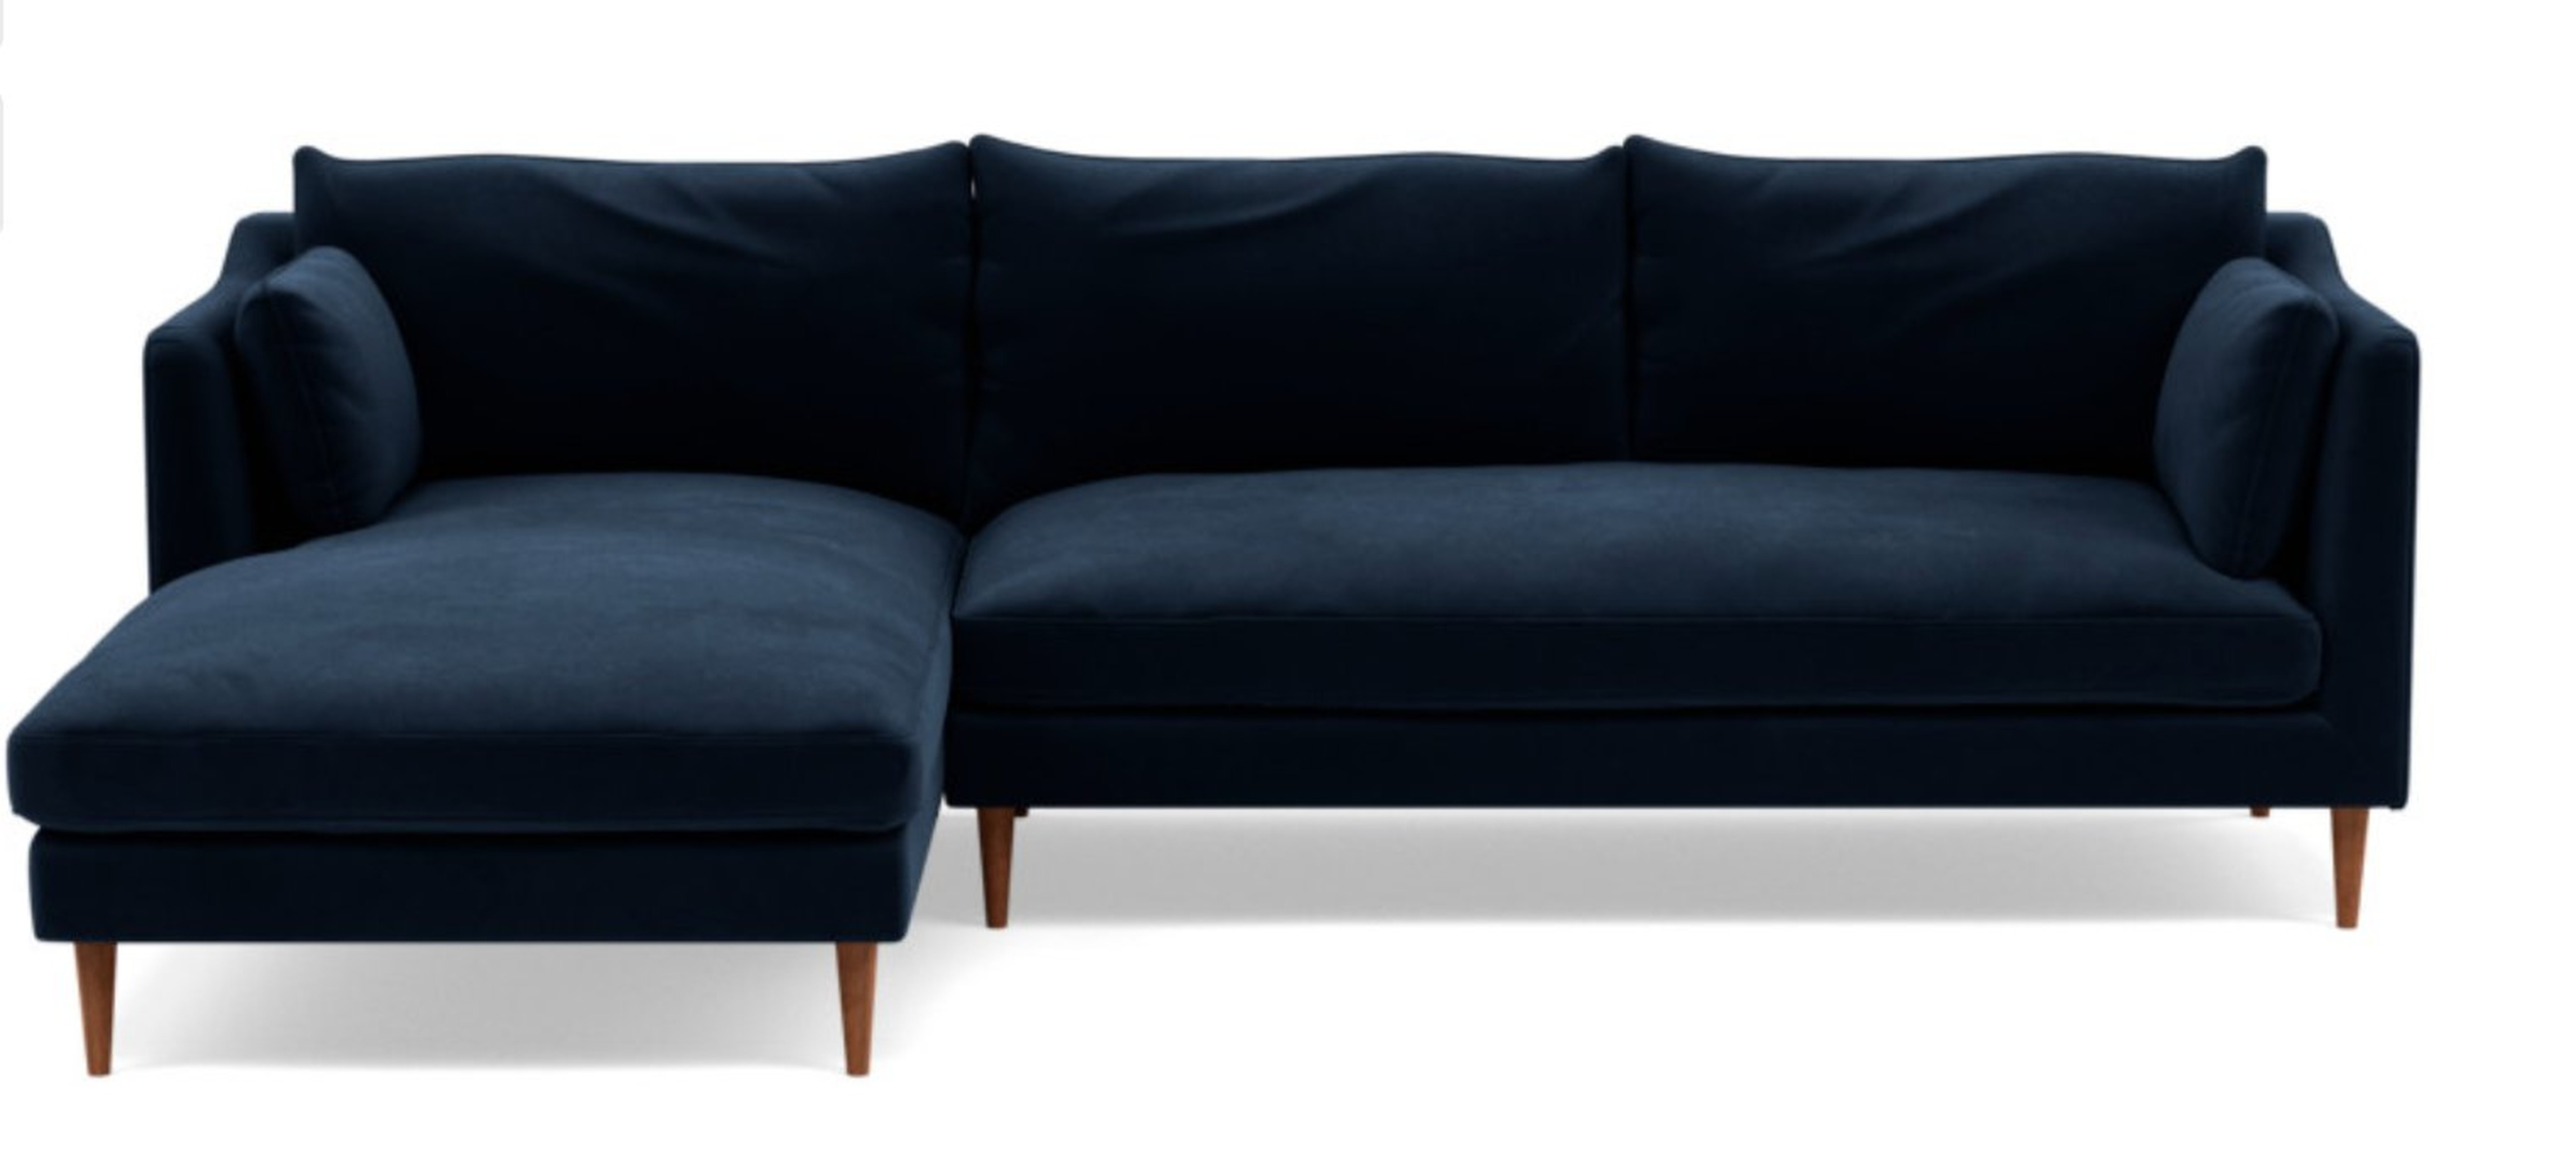 CUSTOM: CAITLIN BY THE EVERYGIRL Sectional Sofa with Left Chaise - Interior Define